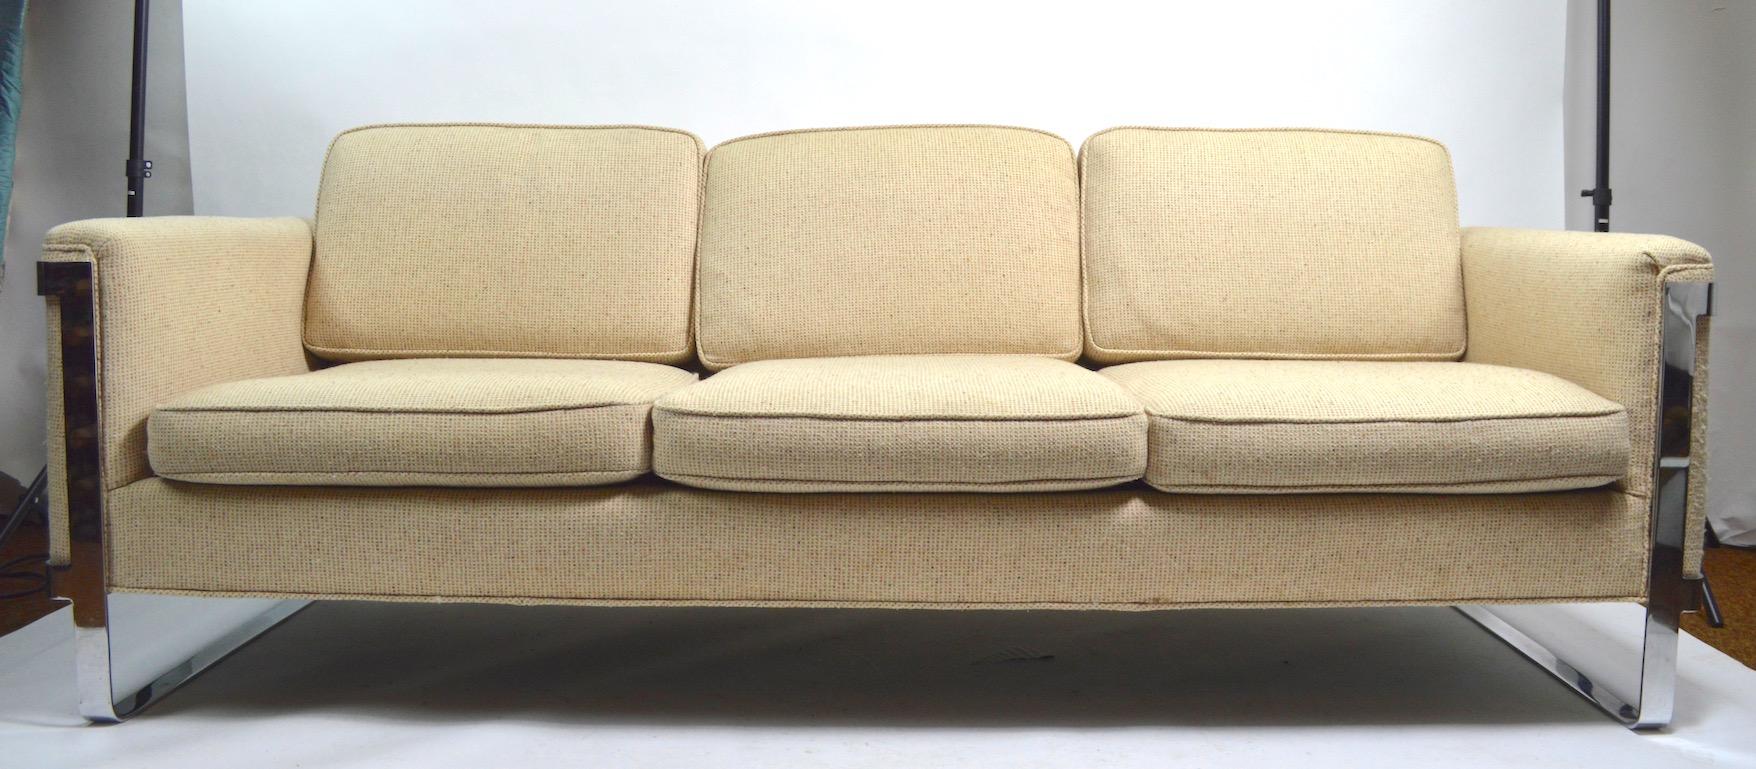 Sexy and sophisticated sofa, design attributed to Milo Baughman. Large scale, well crafted with top quality materials, and fine craftsmanship. Solid, and sturdy, upholstery shows some wear, and discoloration. Please view the companion barrel lounge